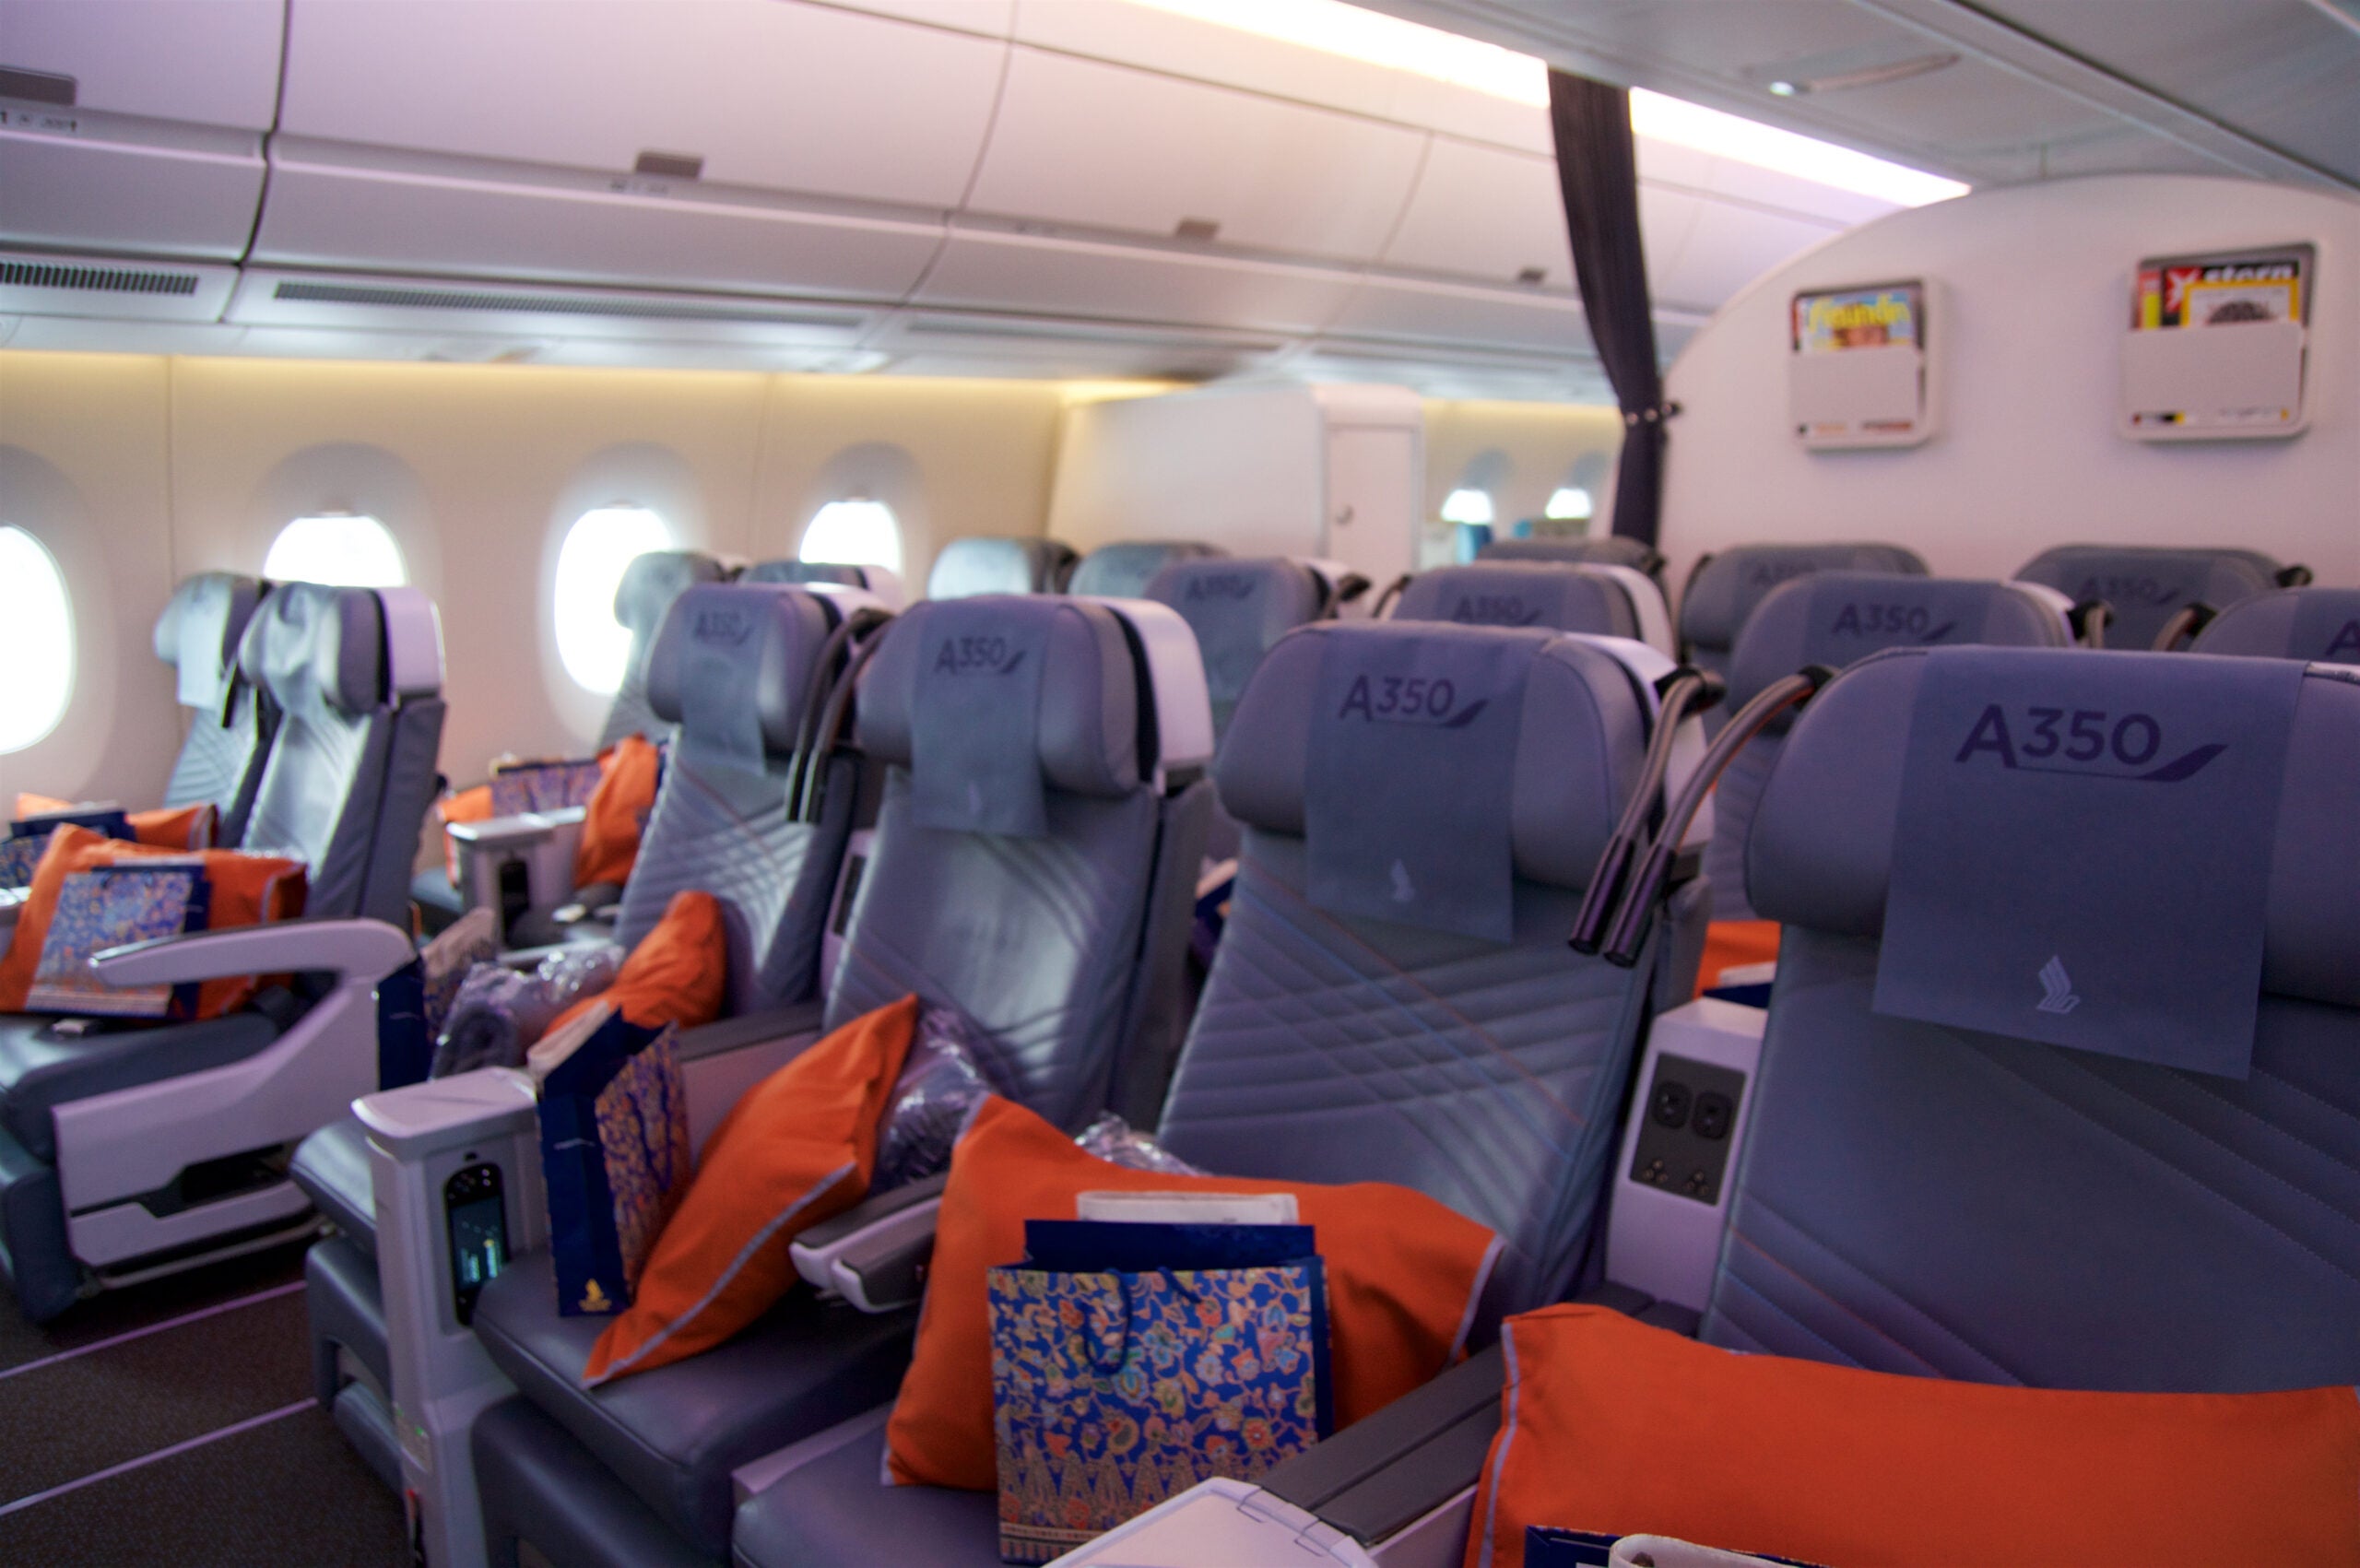 Singapore Airlines Premium Economy Class on board of Airbus A350